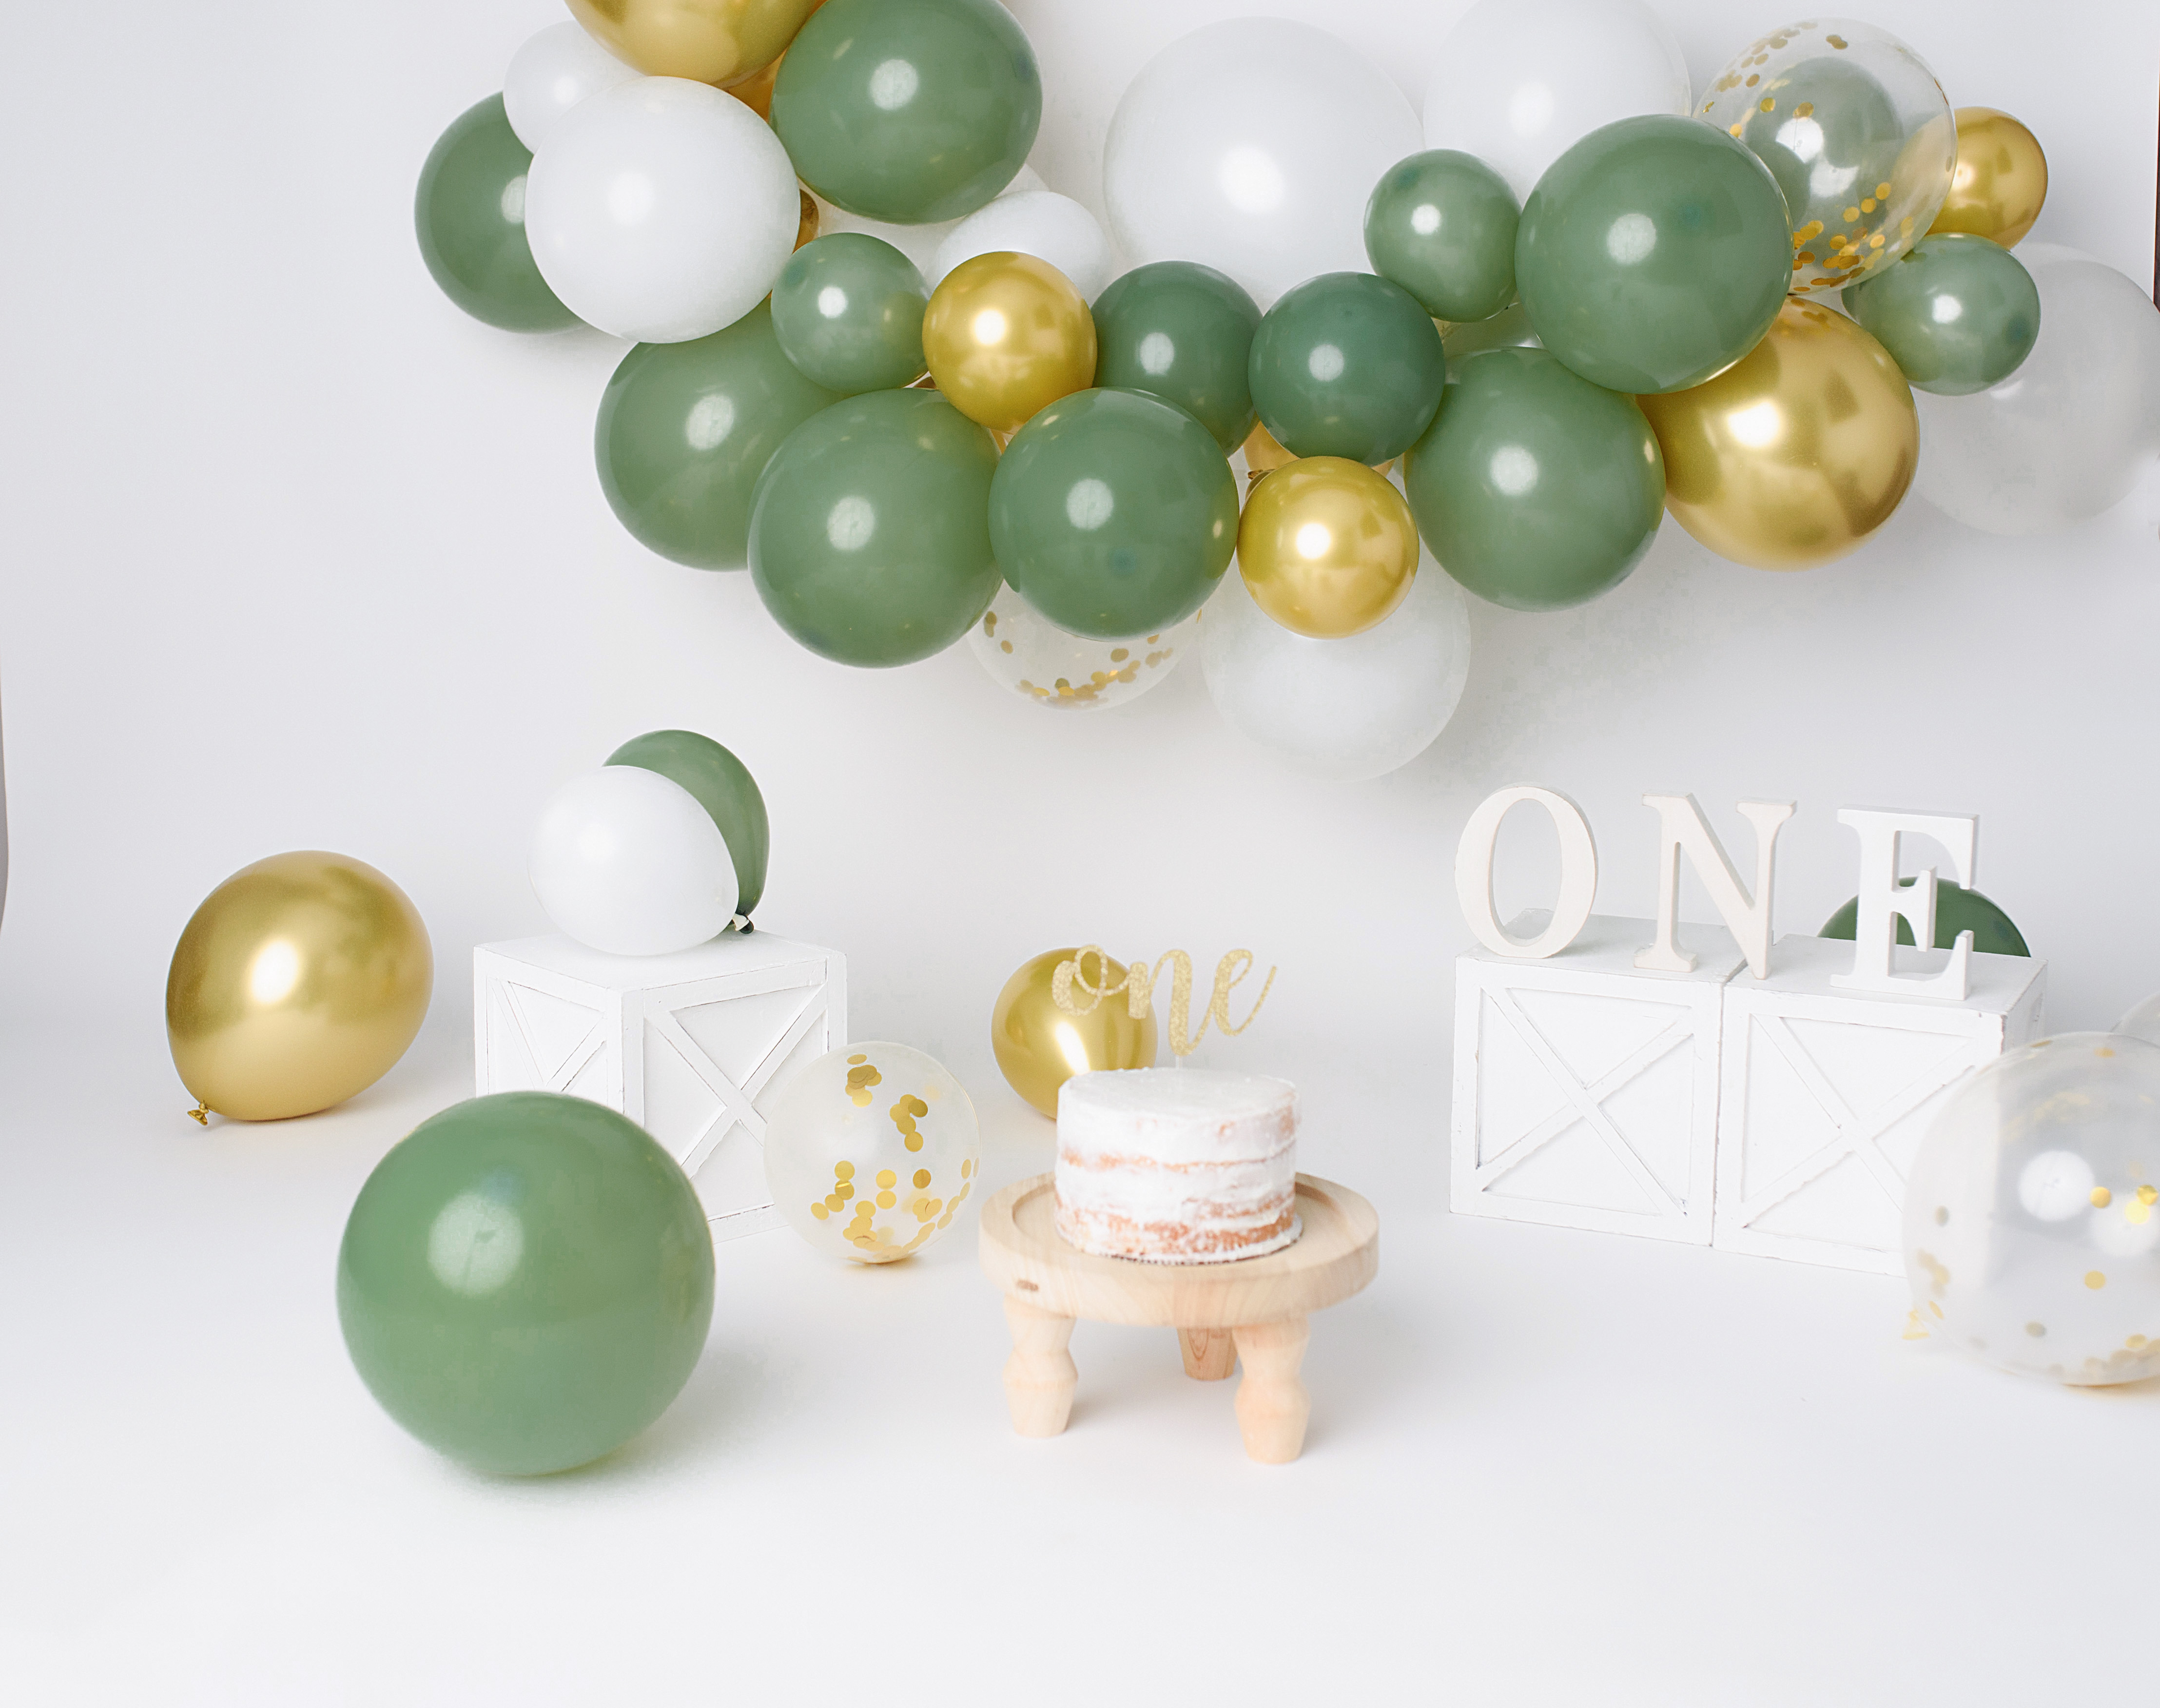 Grand rapids cake smash photography backdrop with green and white balloons